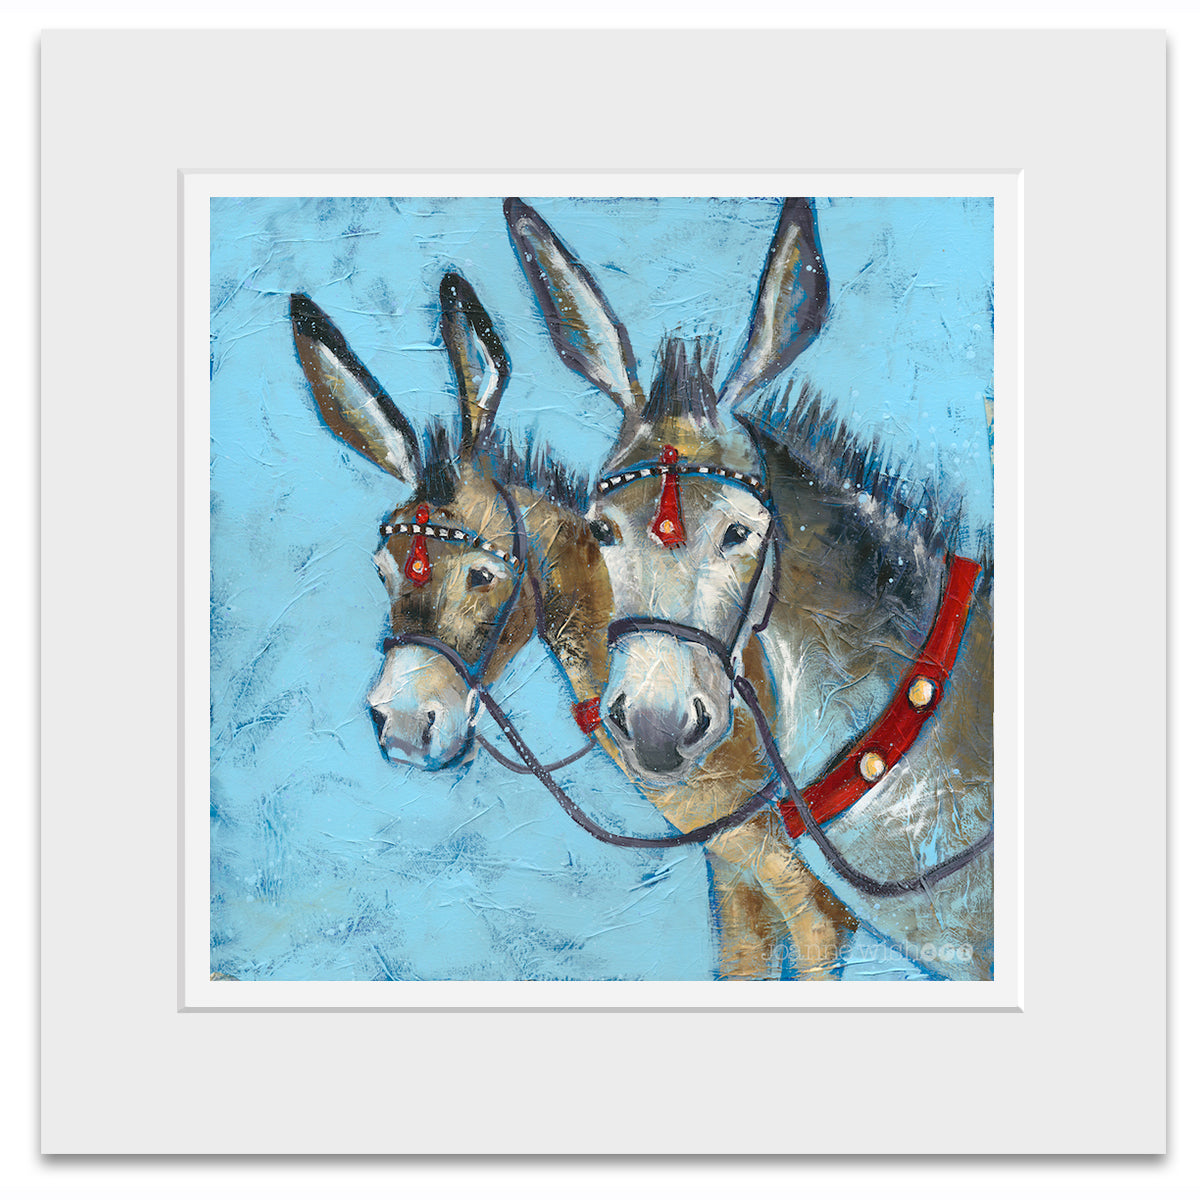 A mounted print of two seaside donkey heads with their ears pricked.